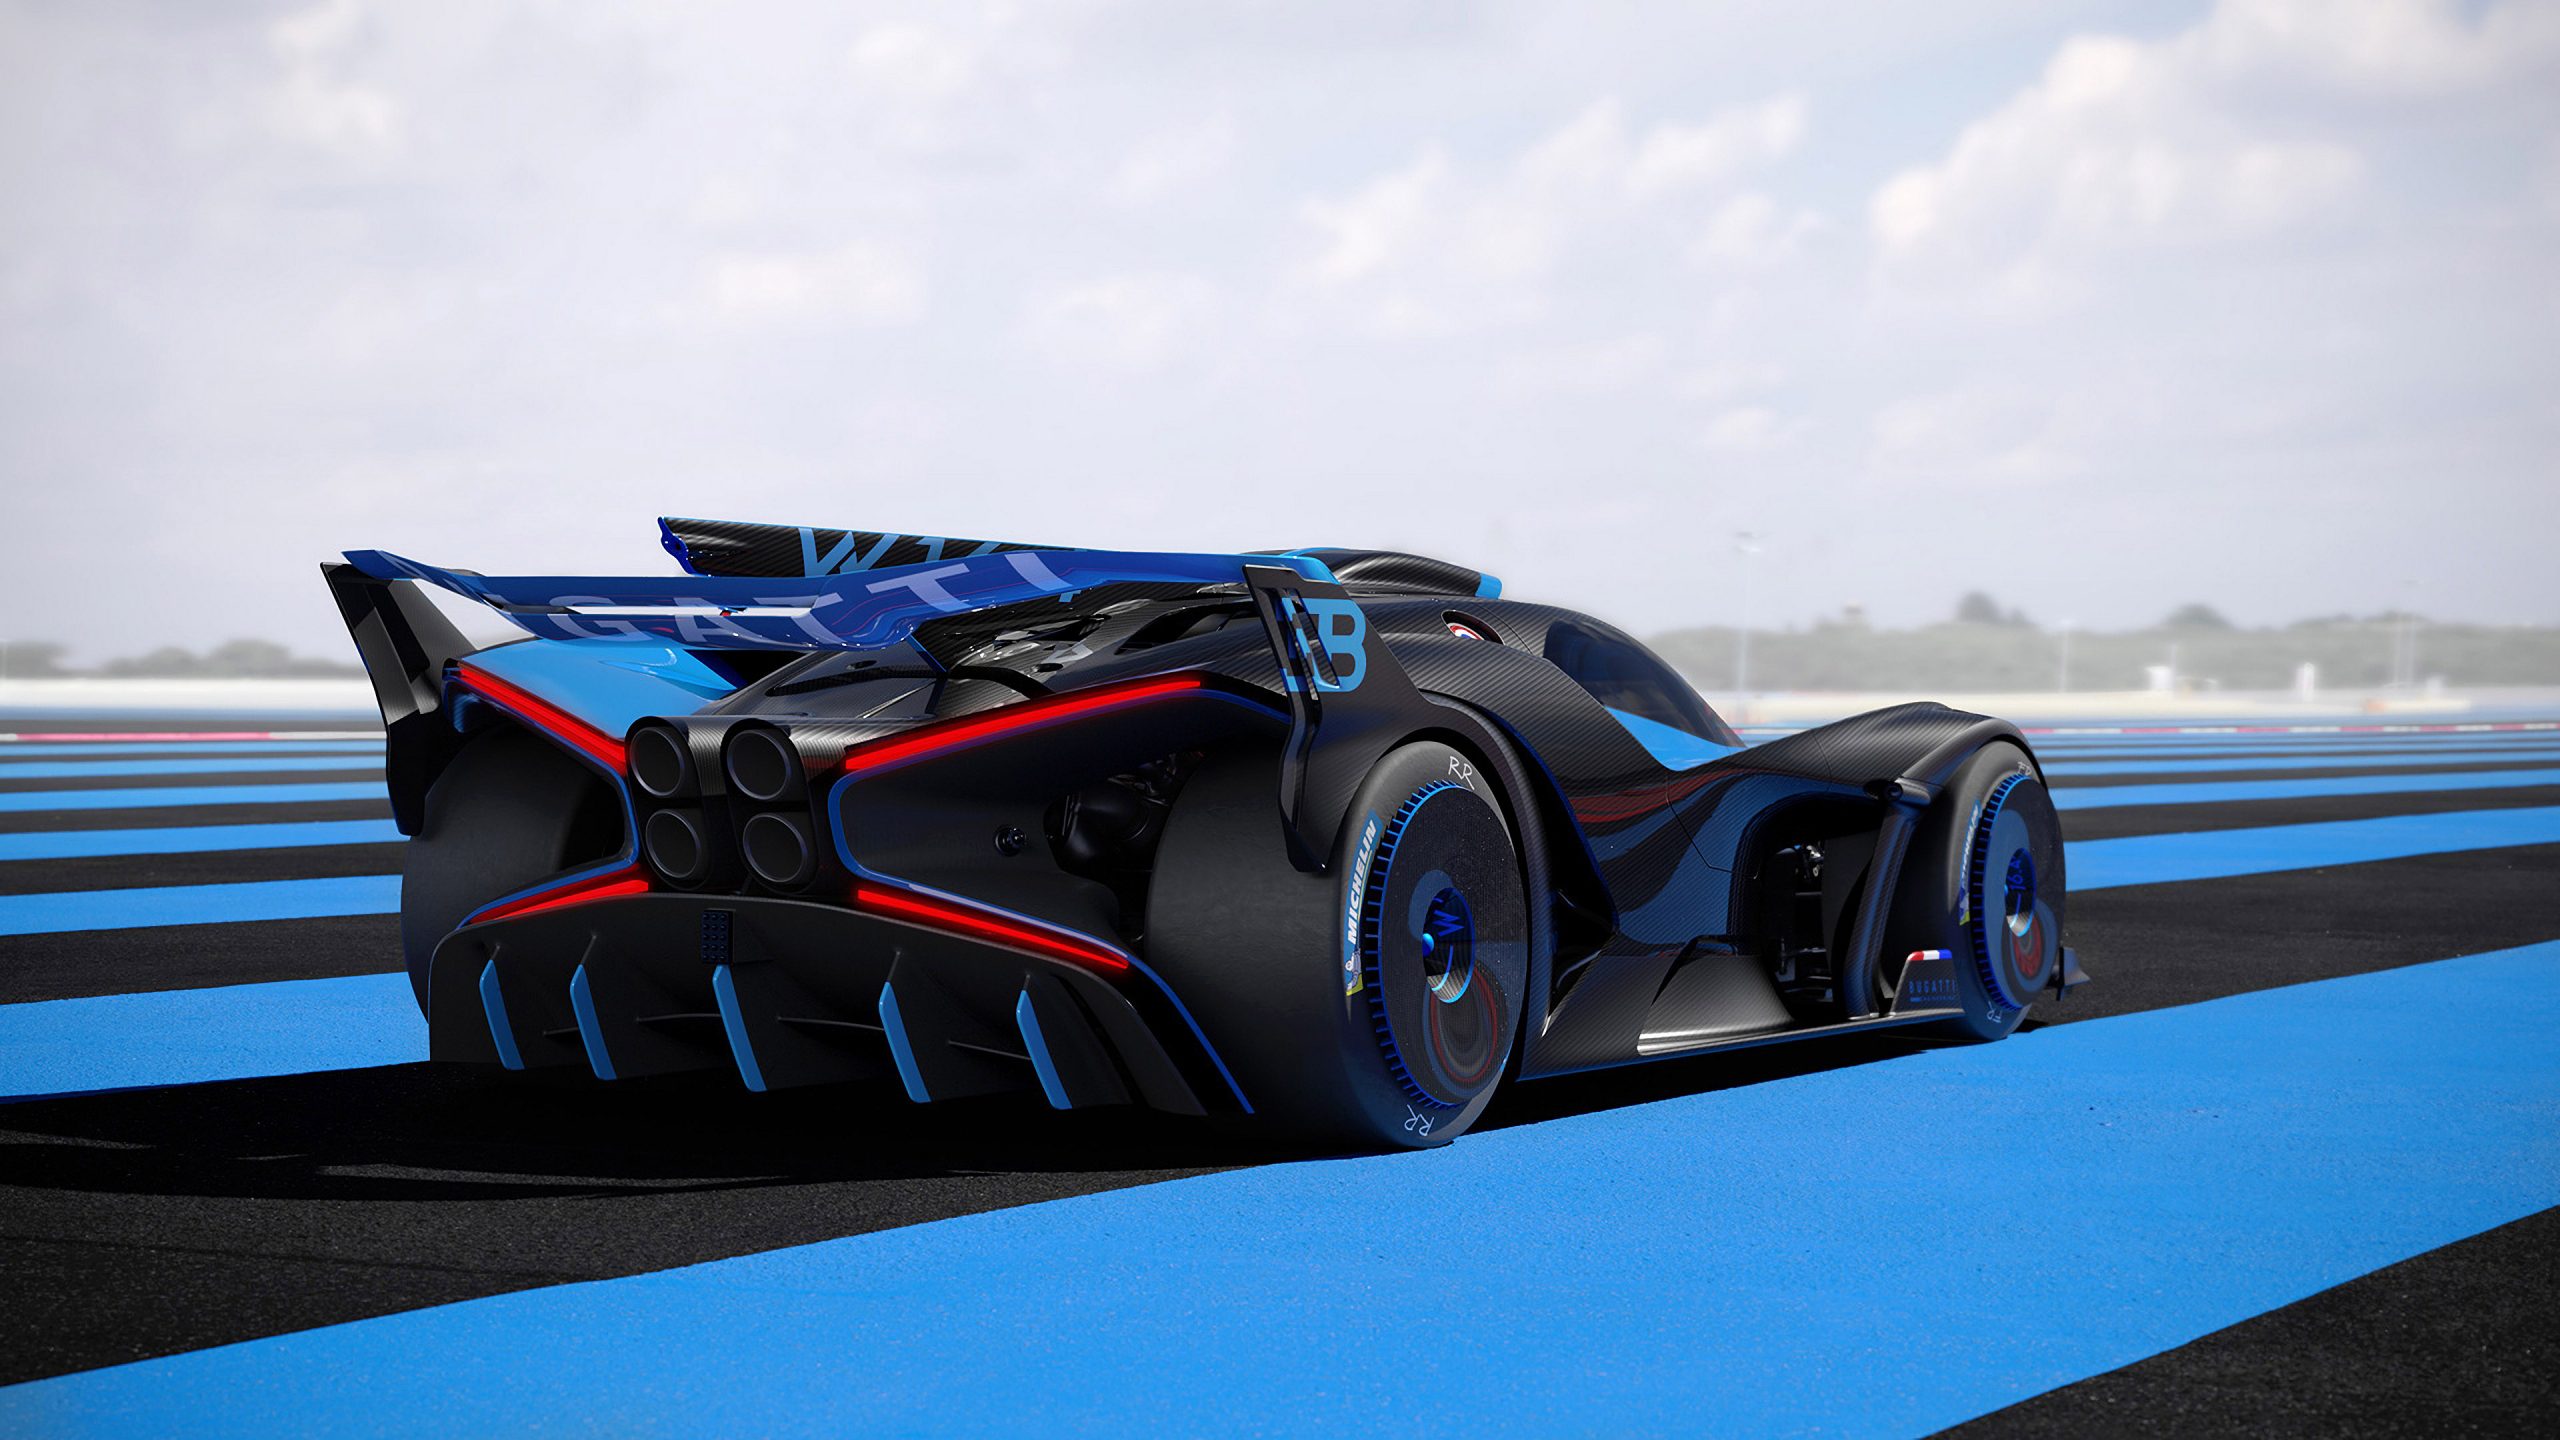 2020 Bugatti Bolide Concept - Wallpapers and HD Images